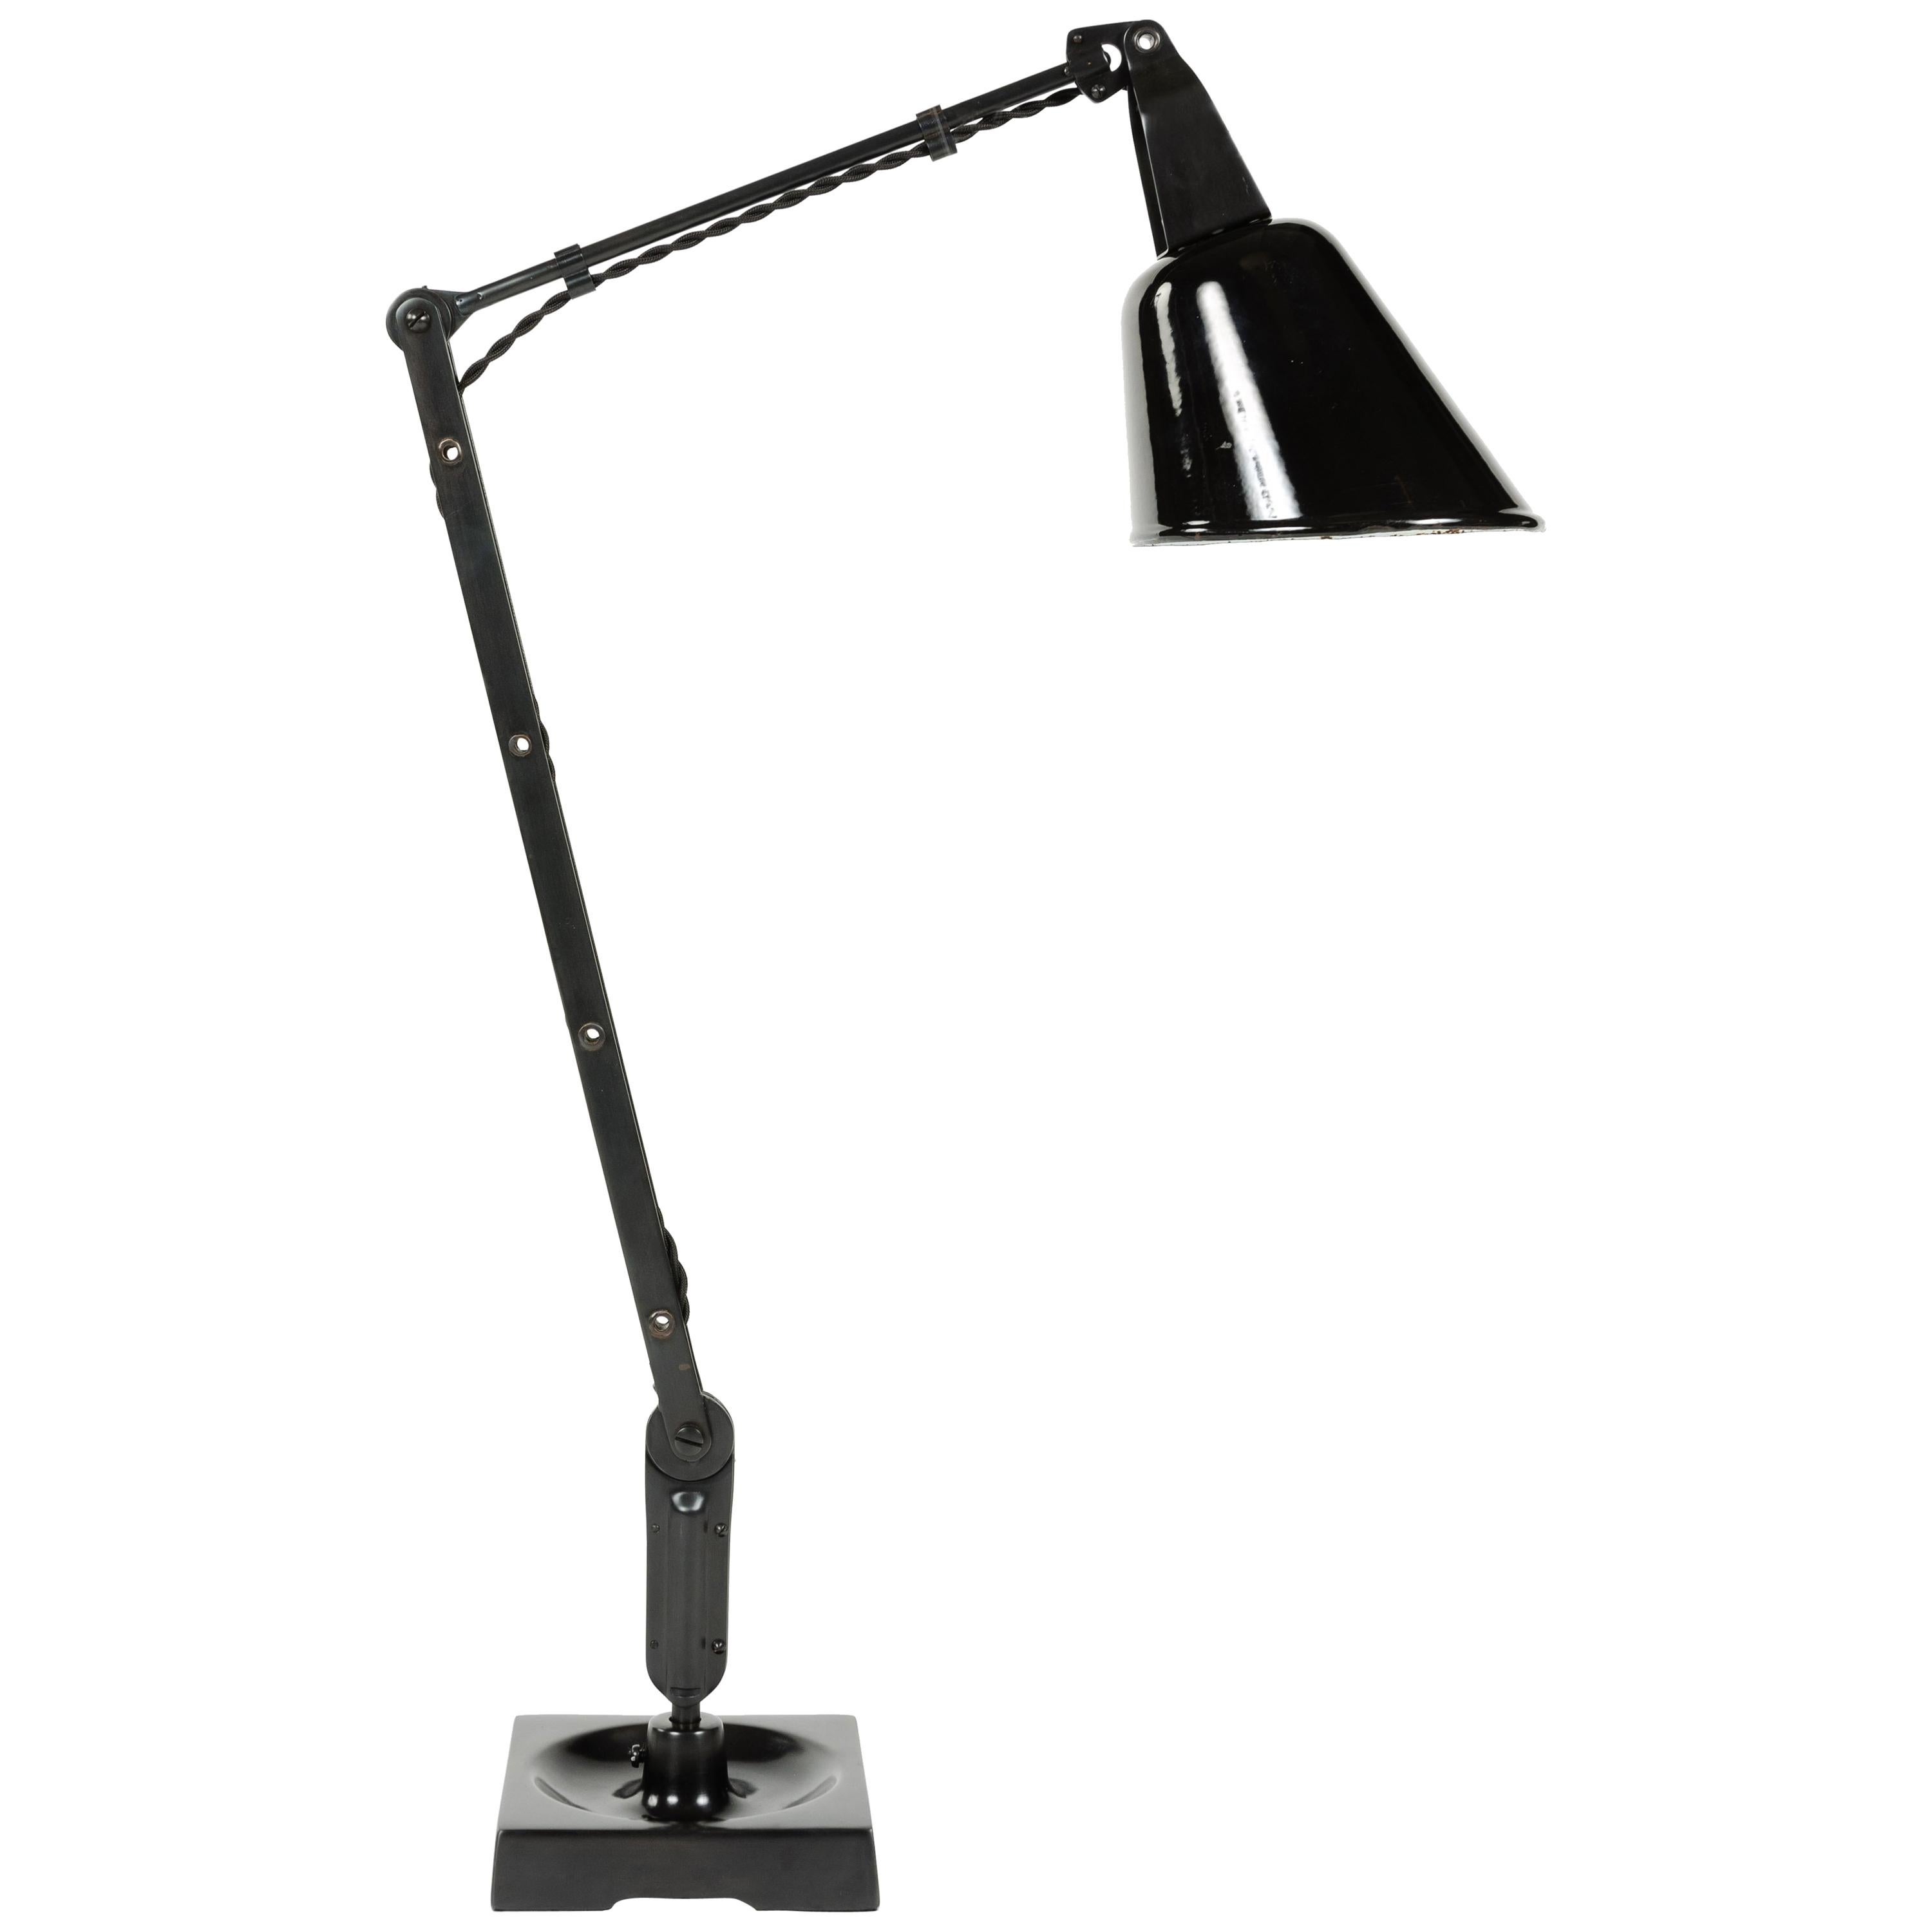 Articulated Desk Lamp For Sale